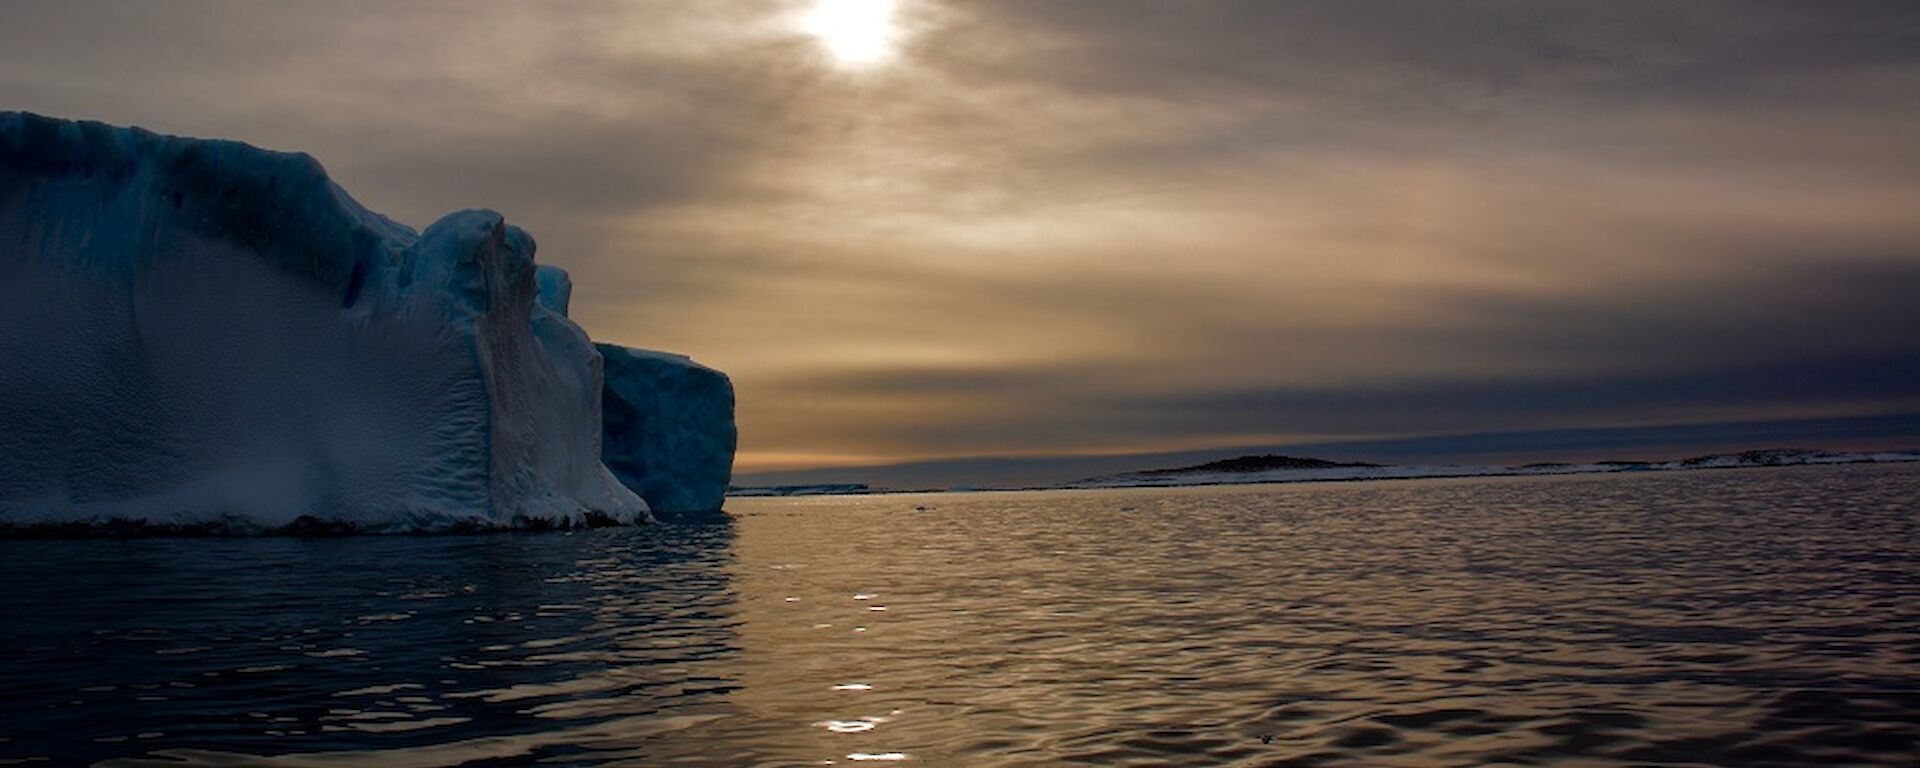 A small iceberg with weak sunlight backlighting it